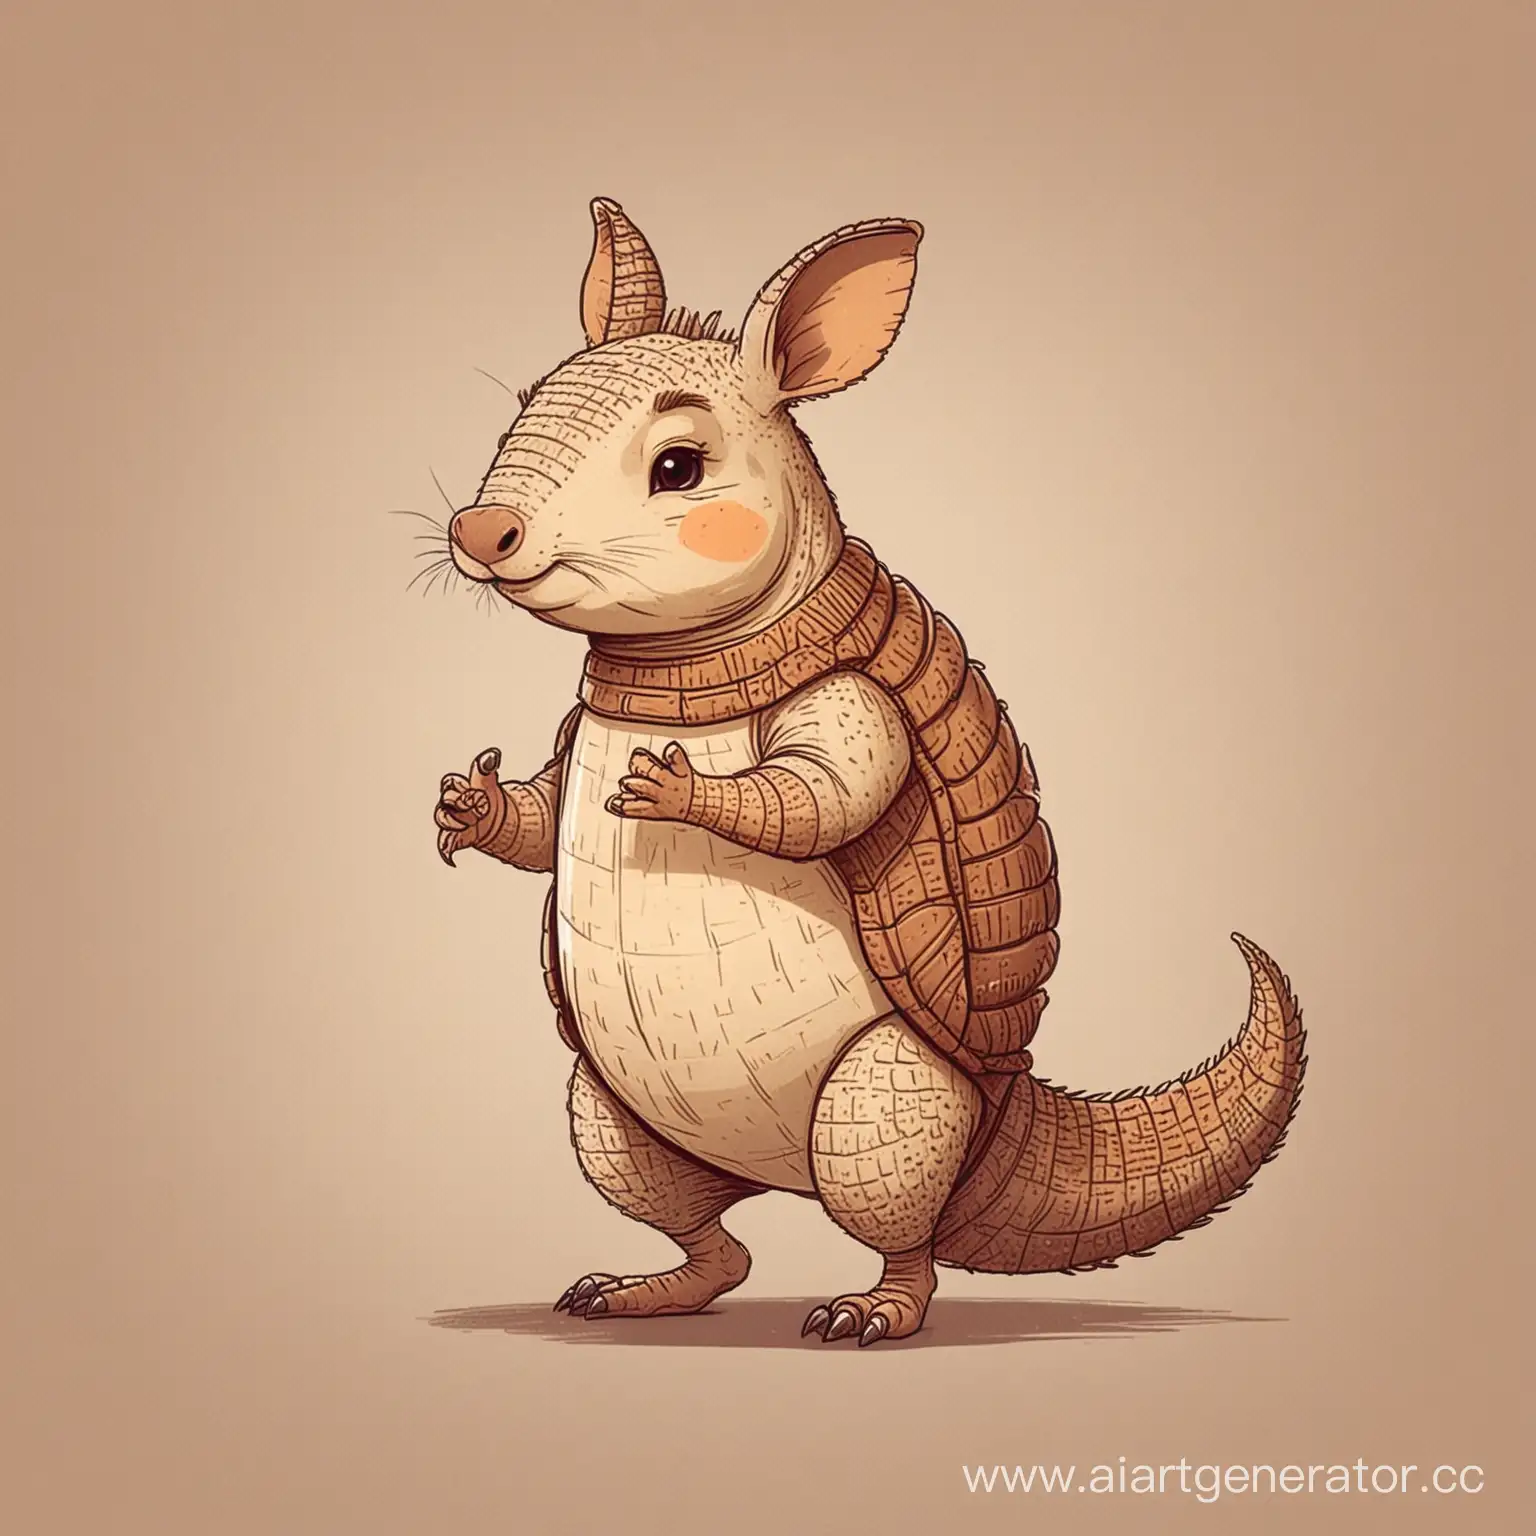 The character is an armadillo animal standing on its hind legs, a thoughtful face, a flat-style drawing